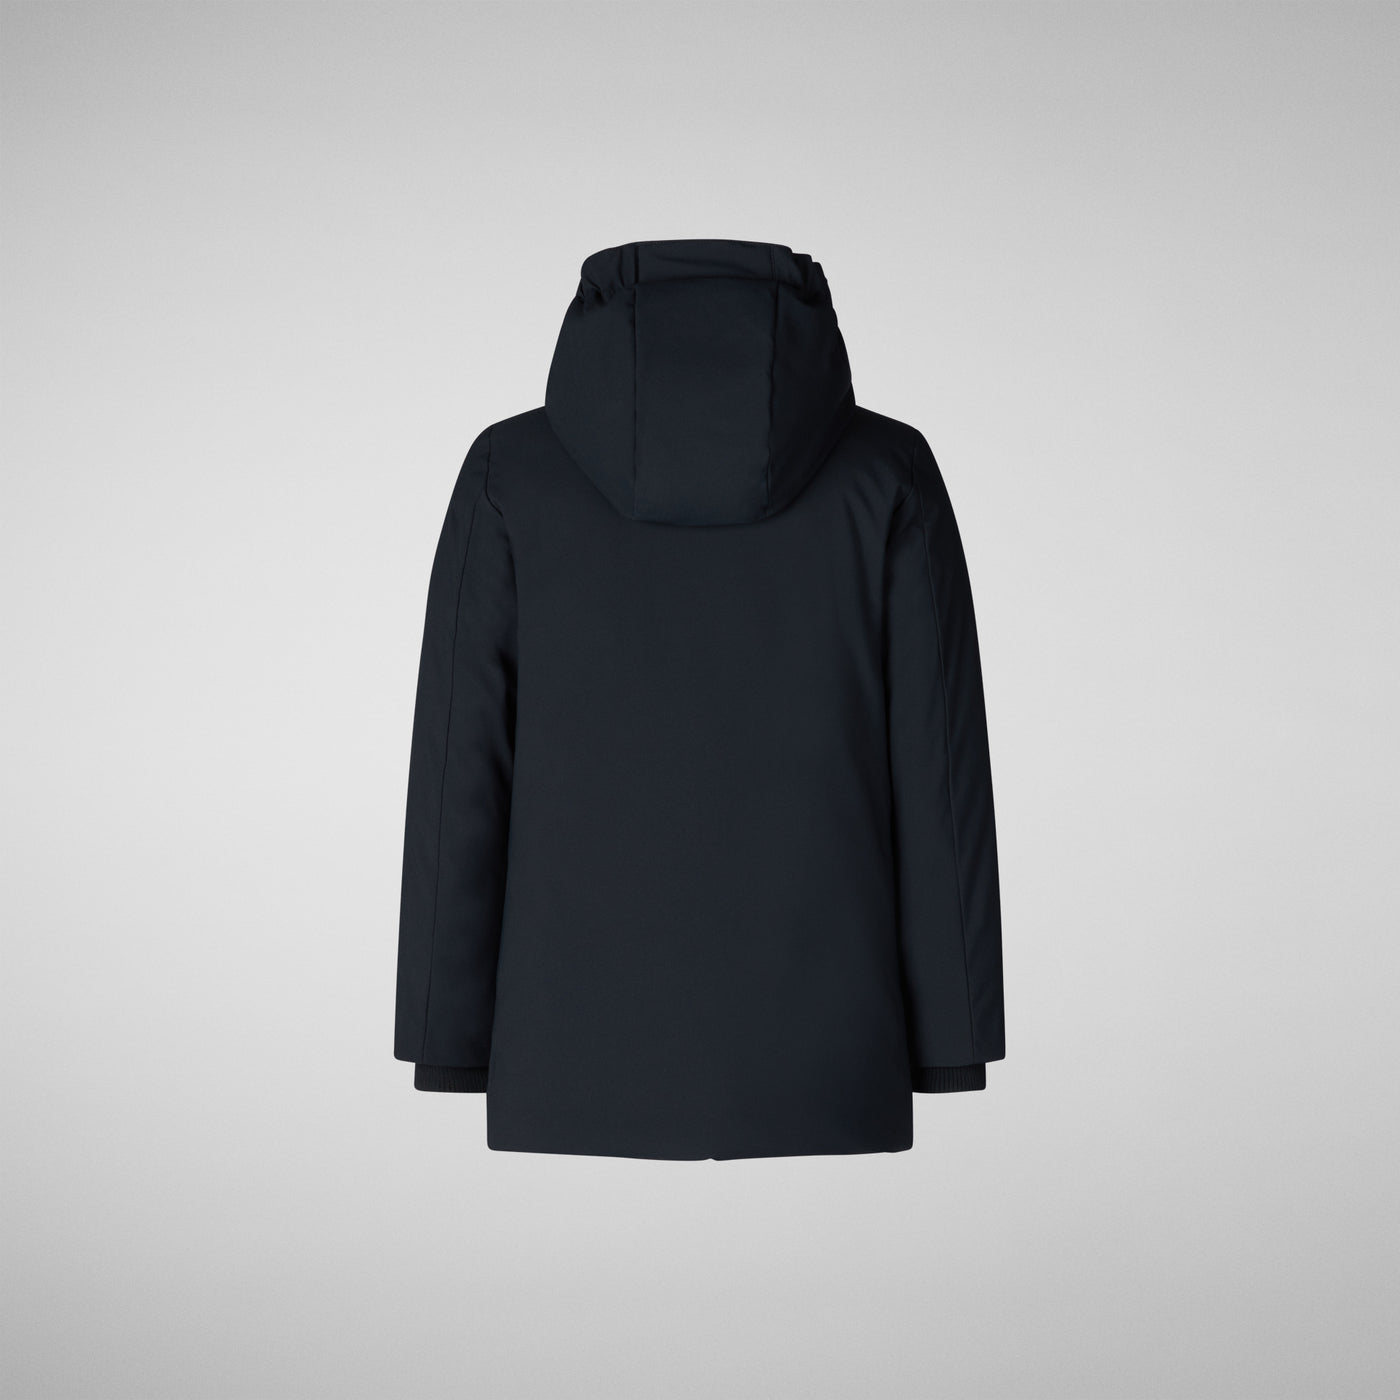 Product Back View of Girls' Ally Hooded Parka in Black